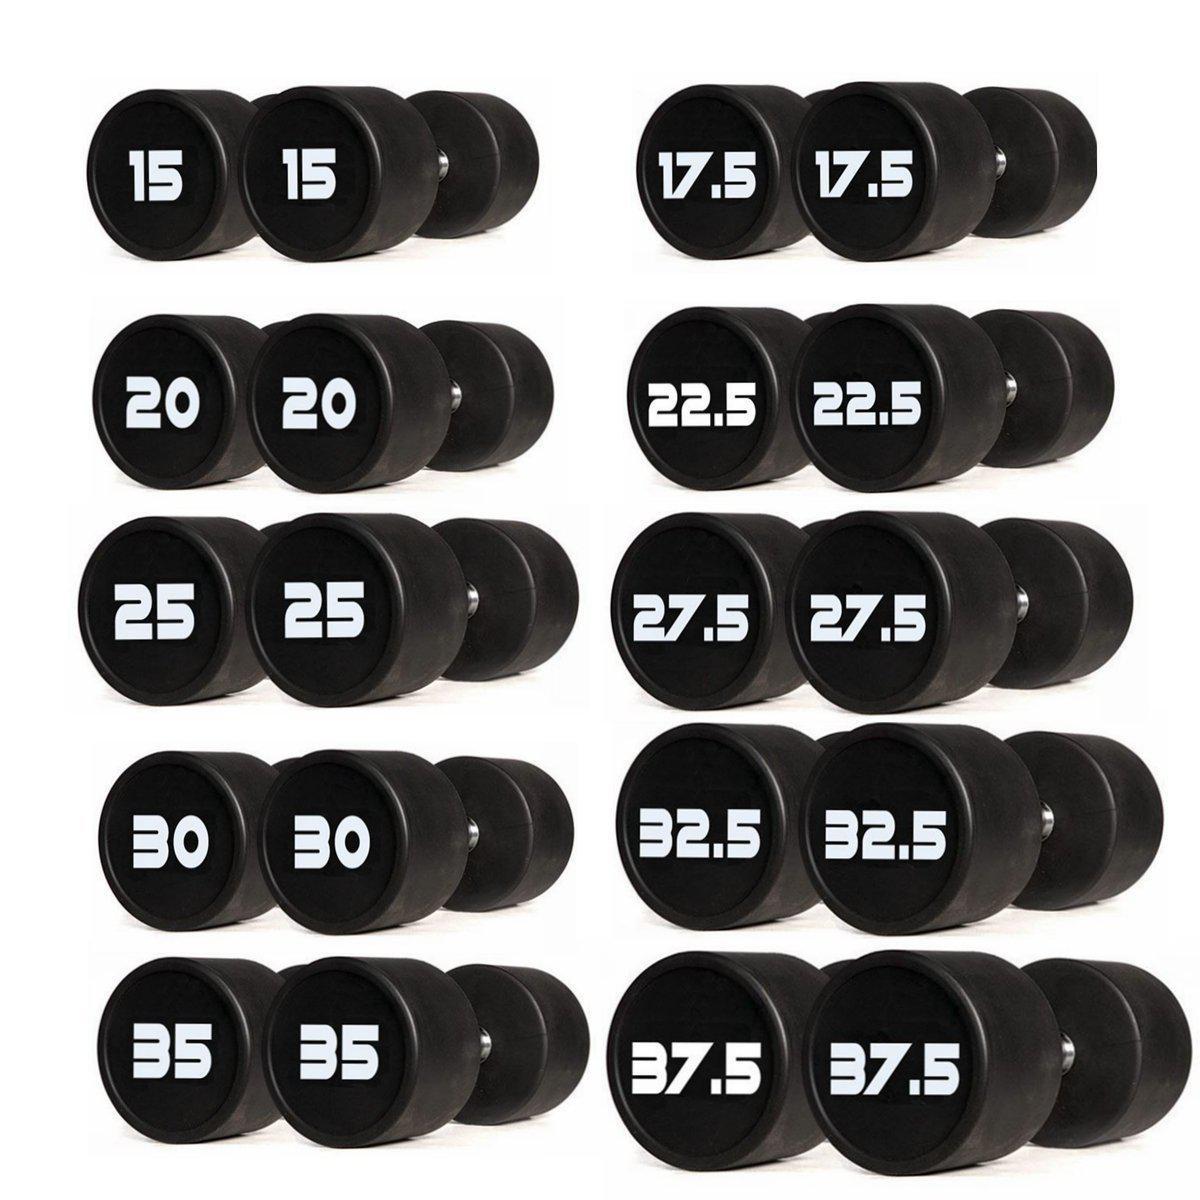 PU Dumbbells Package - 10 Pairs (15-37.5kg) | Gym Direct-Prostyle PU Dumbbell Package-Gym Direct